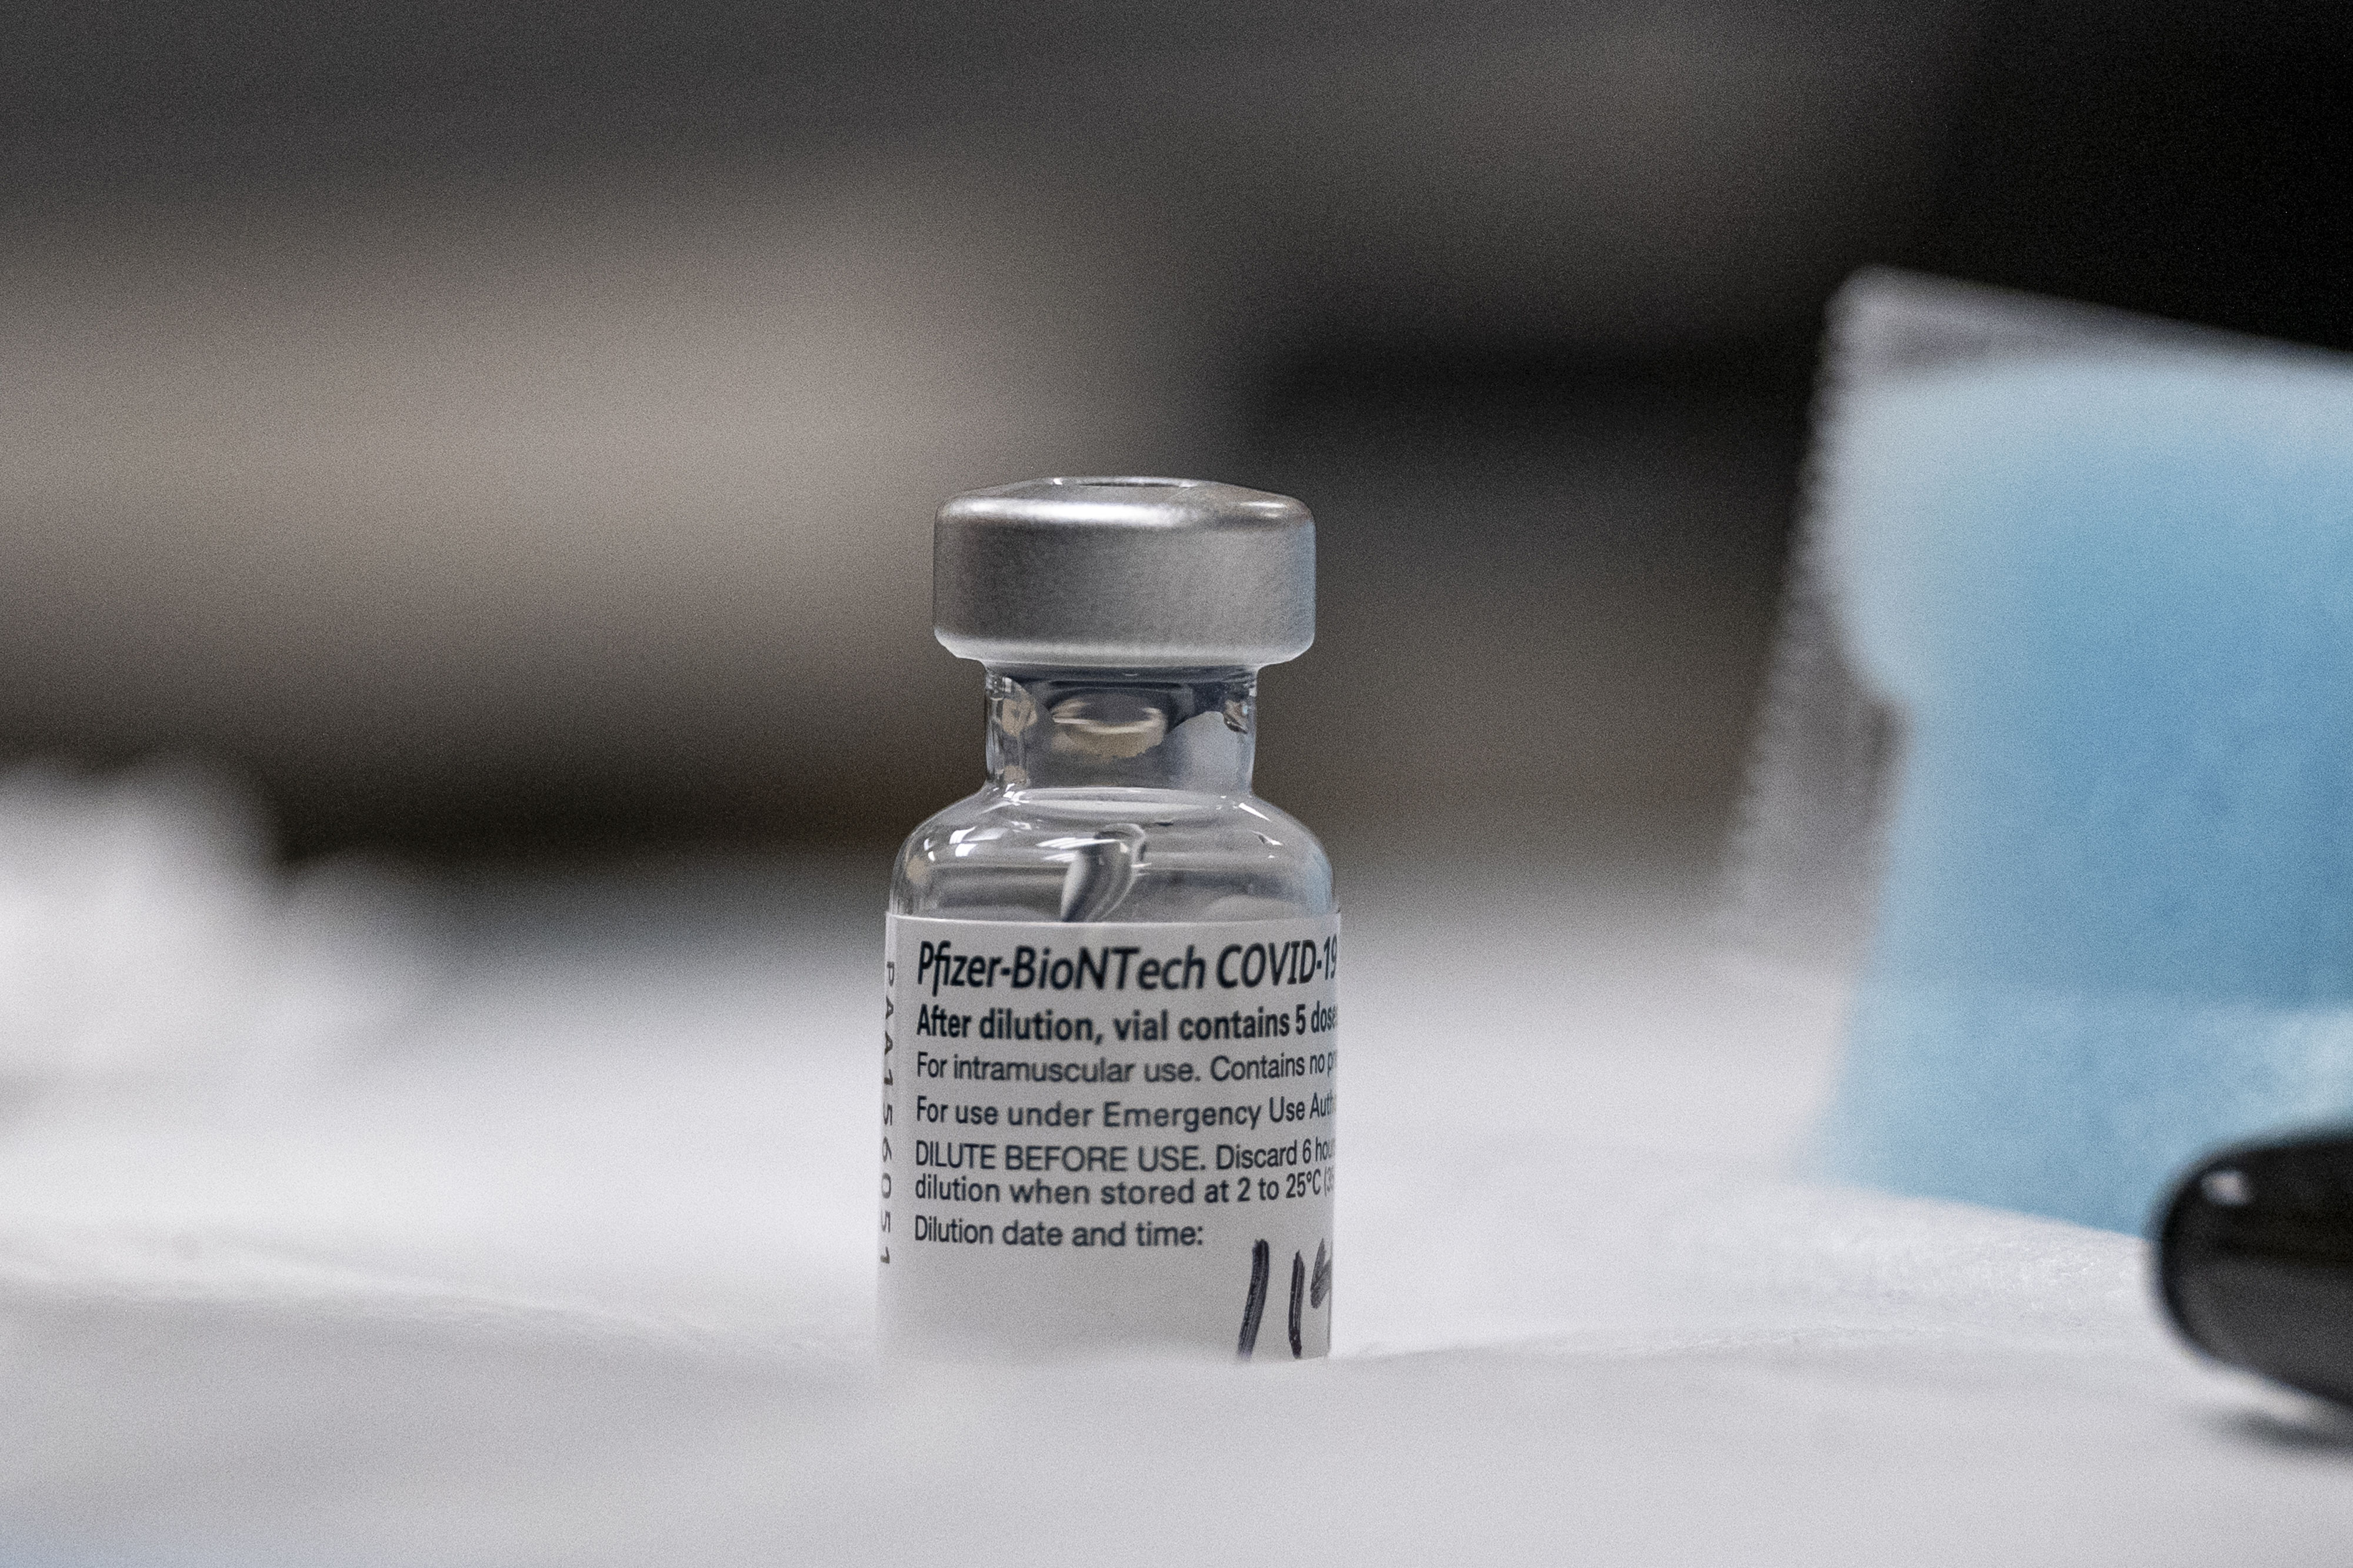 78-year-old SoCal woman dies after receiving first dose of COVID vaccine – CBS Los Angeles